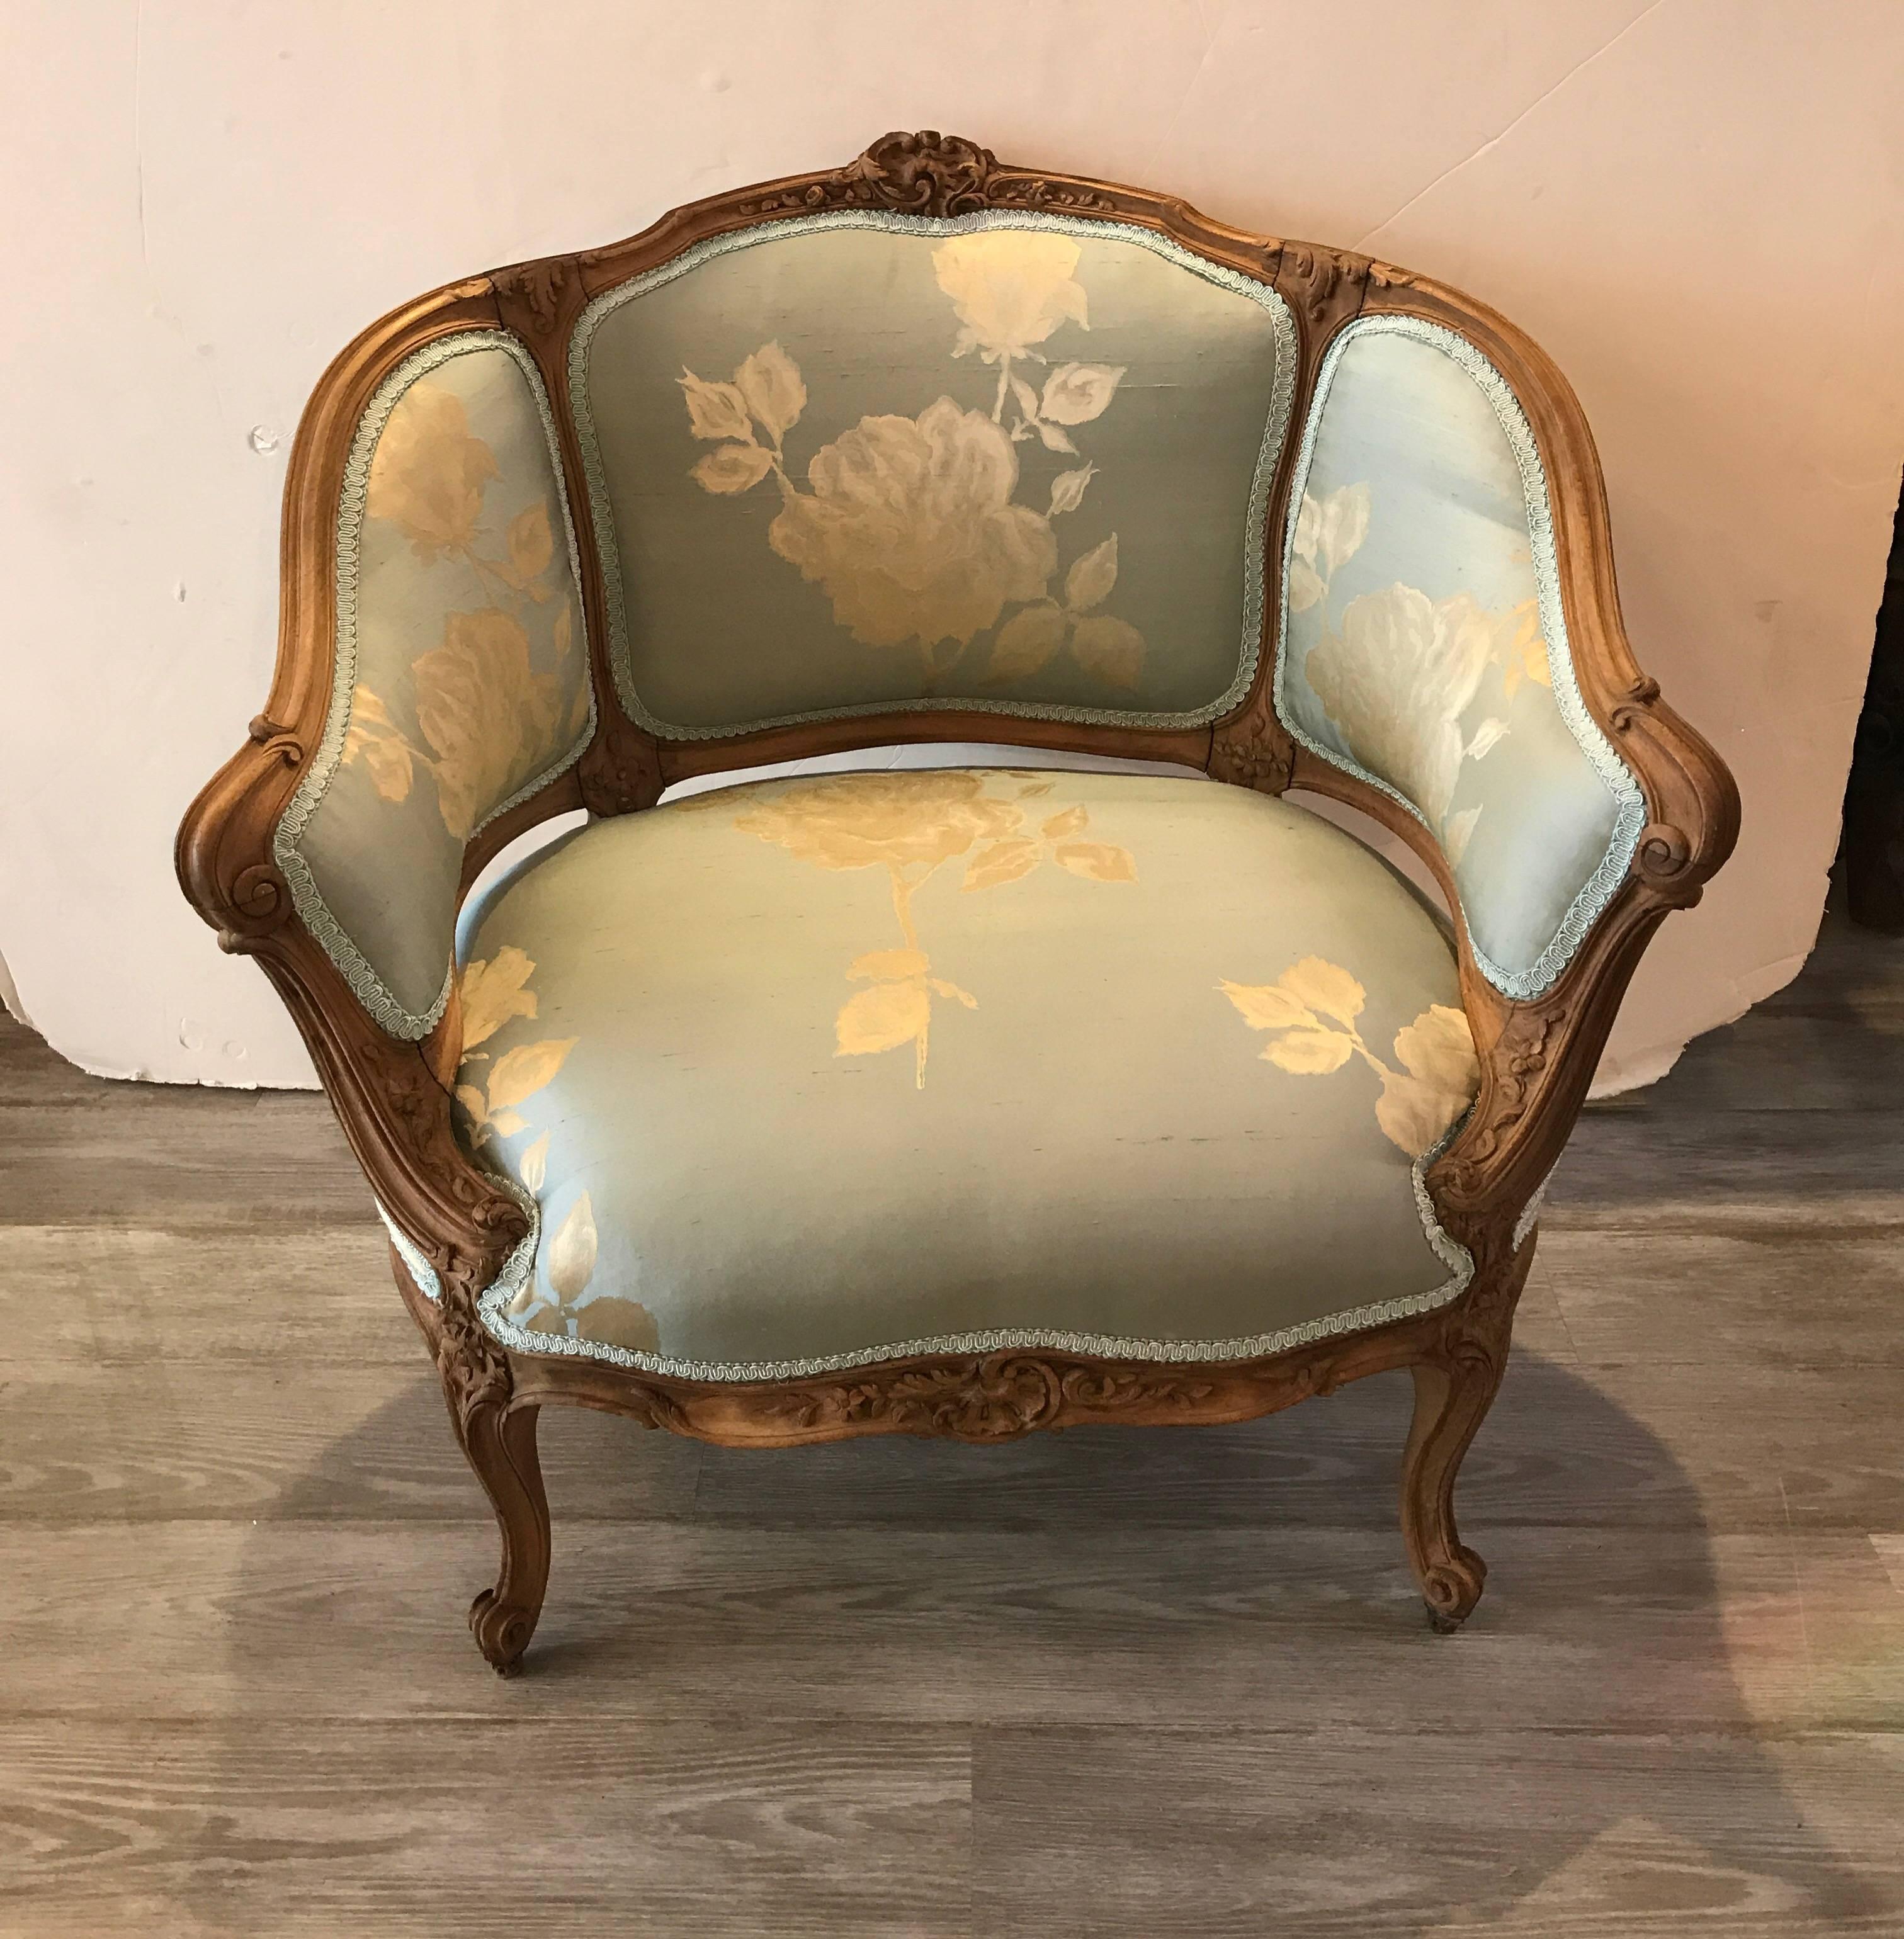 Curvaceous natural walnut frame Louis XV style chair with new silk upholstery. The hand carved frame with a scrubbed and natural walnut in a silver blue and oyster silk fabric. The chair is a fresh take an a very formal style. This chair is wider